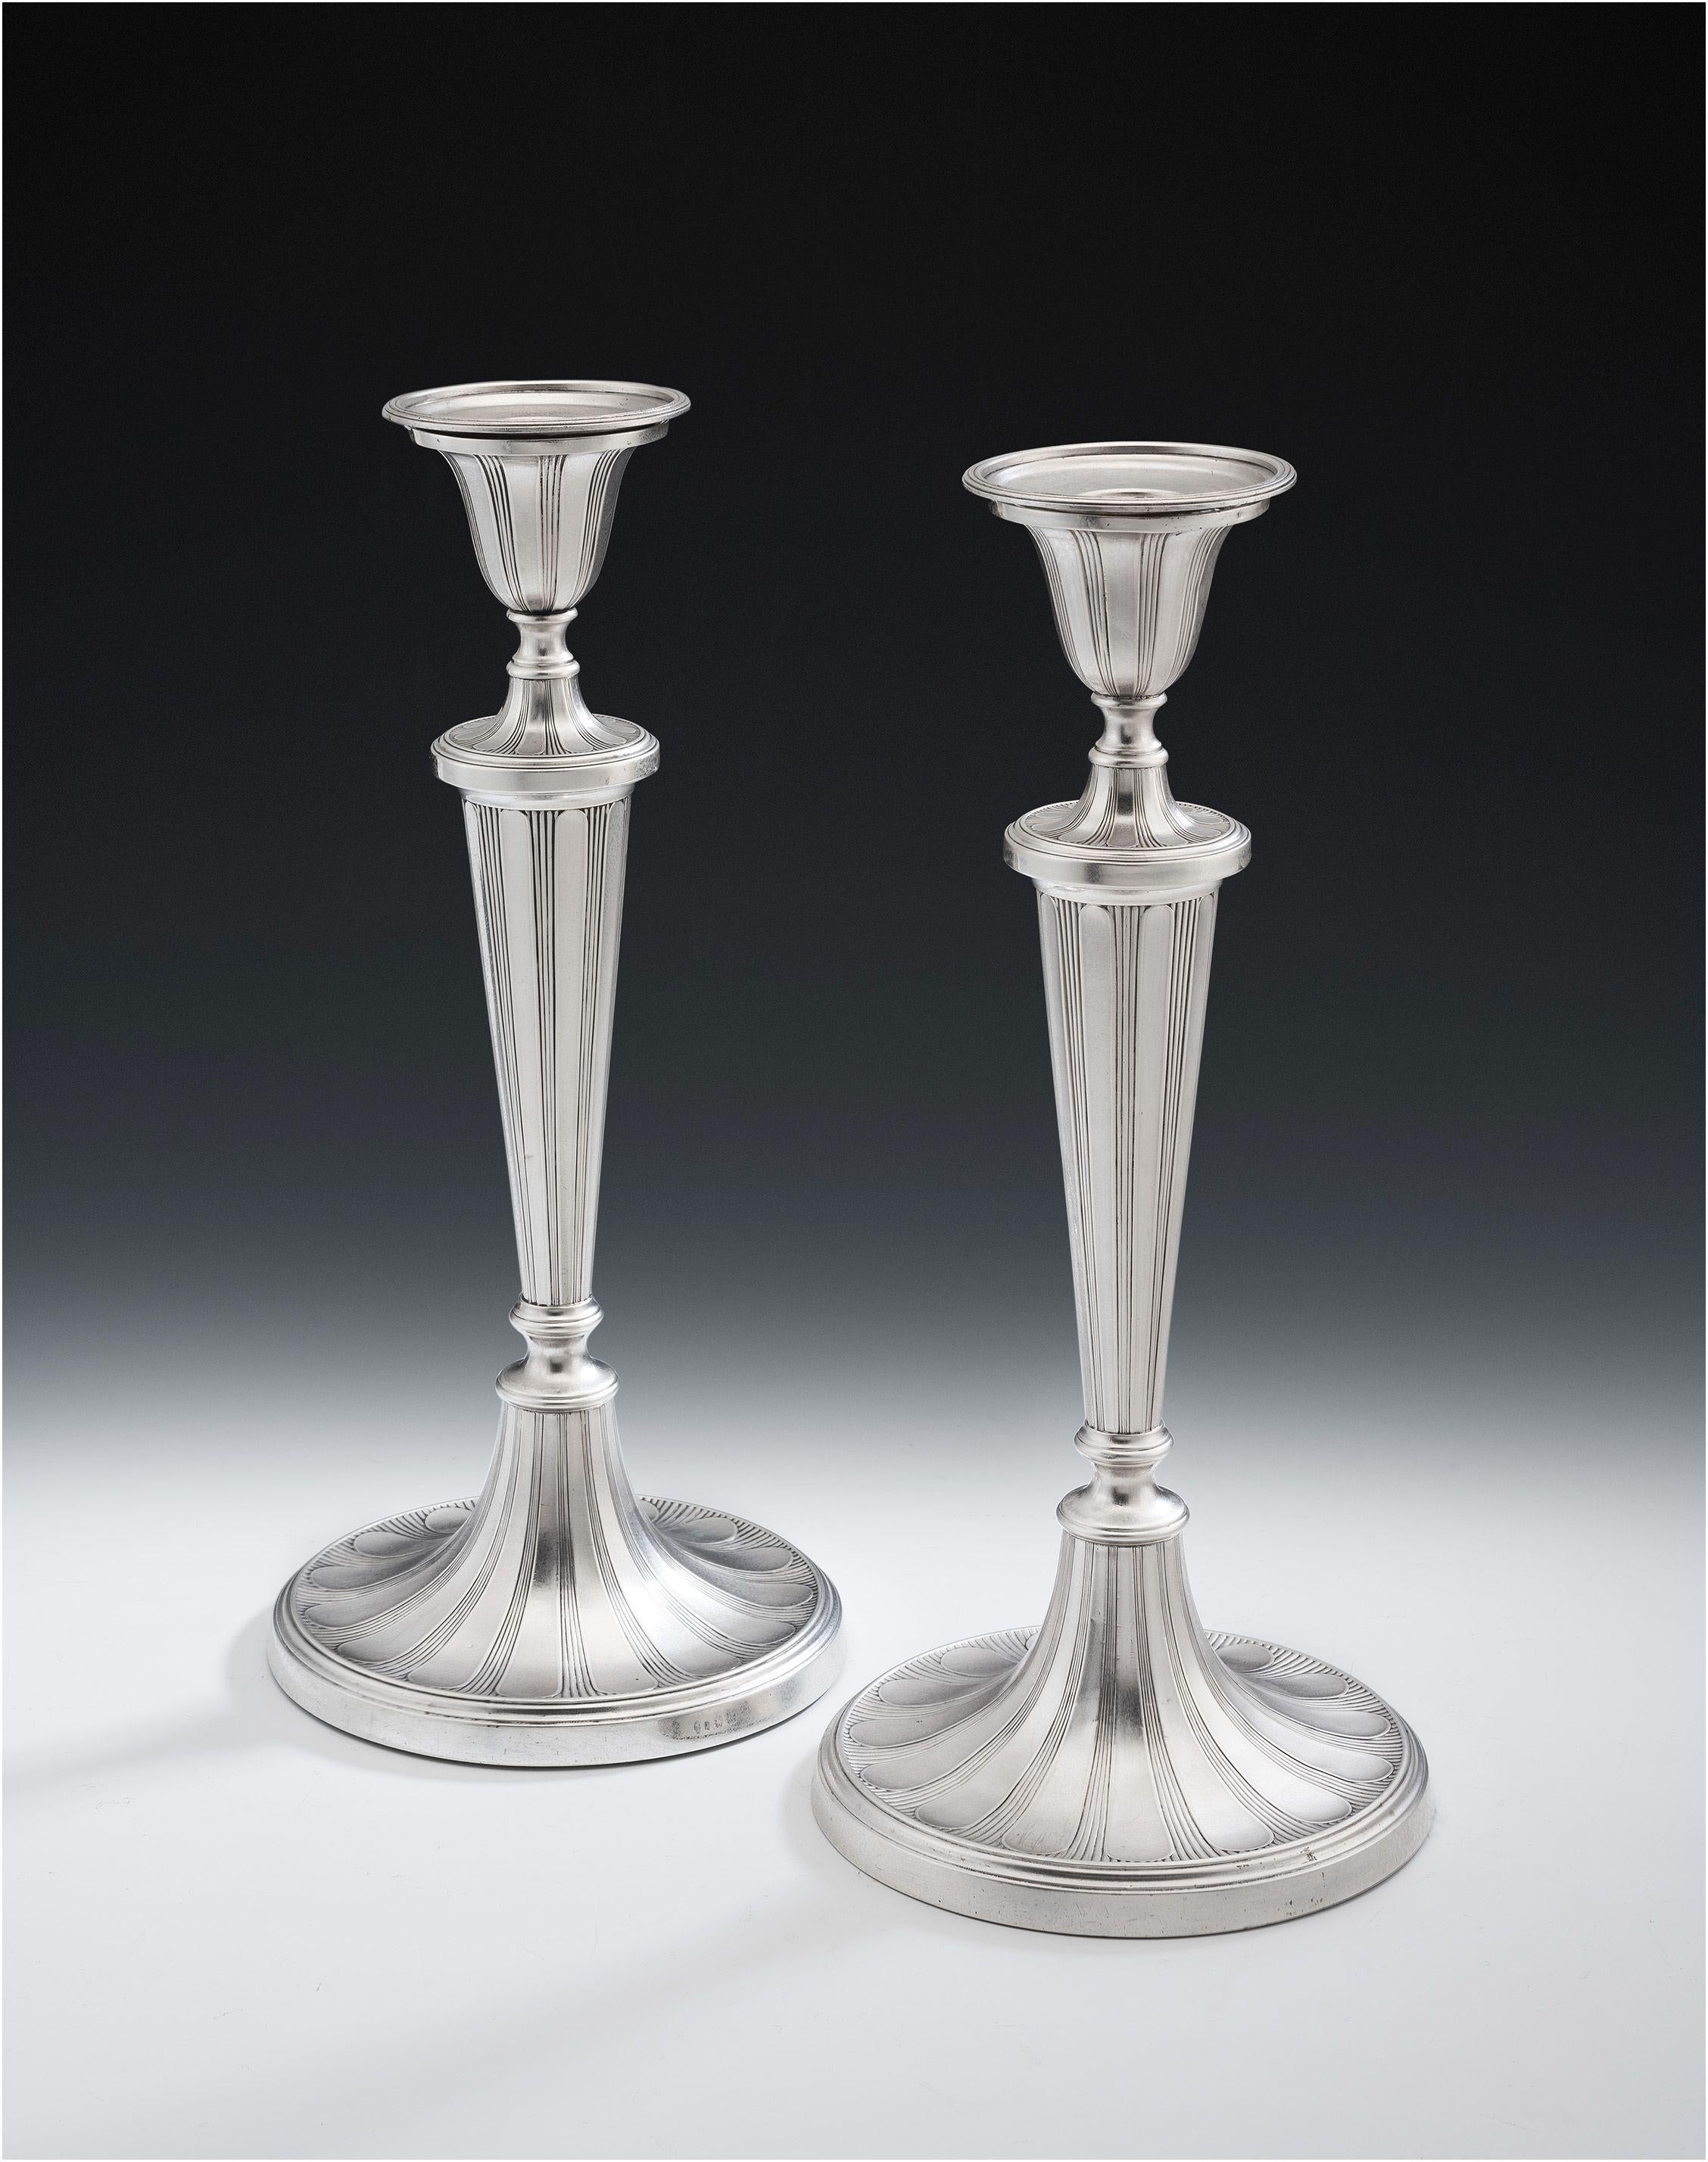 These exceptionally fine and unusual George III sterling silver candlesticks were made in Sheffield in 1790 by Tudor & Leader. The candlesticks are of a large size and stand on circular bases. The bases, tapering stems, and tulip shaped sockets are